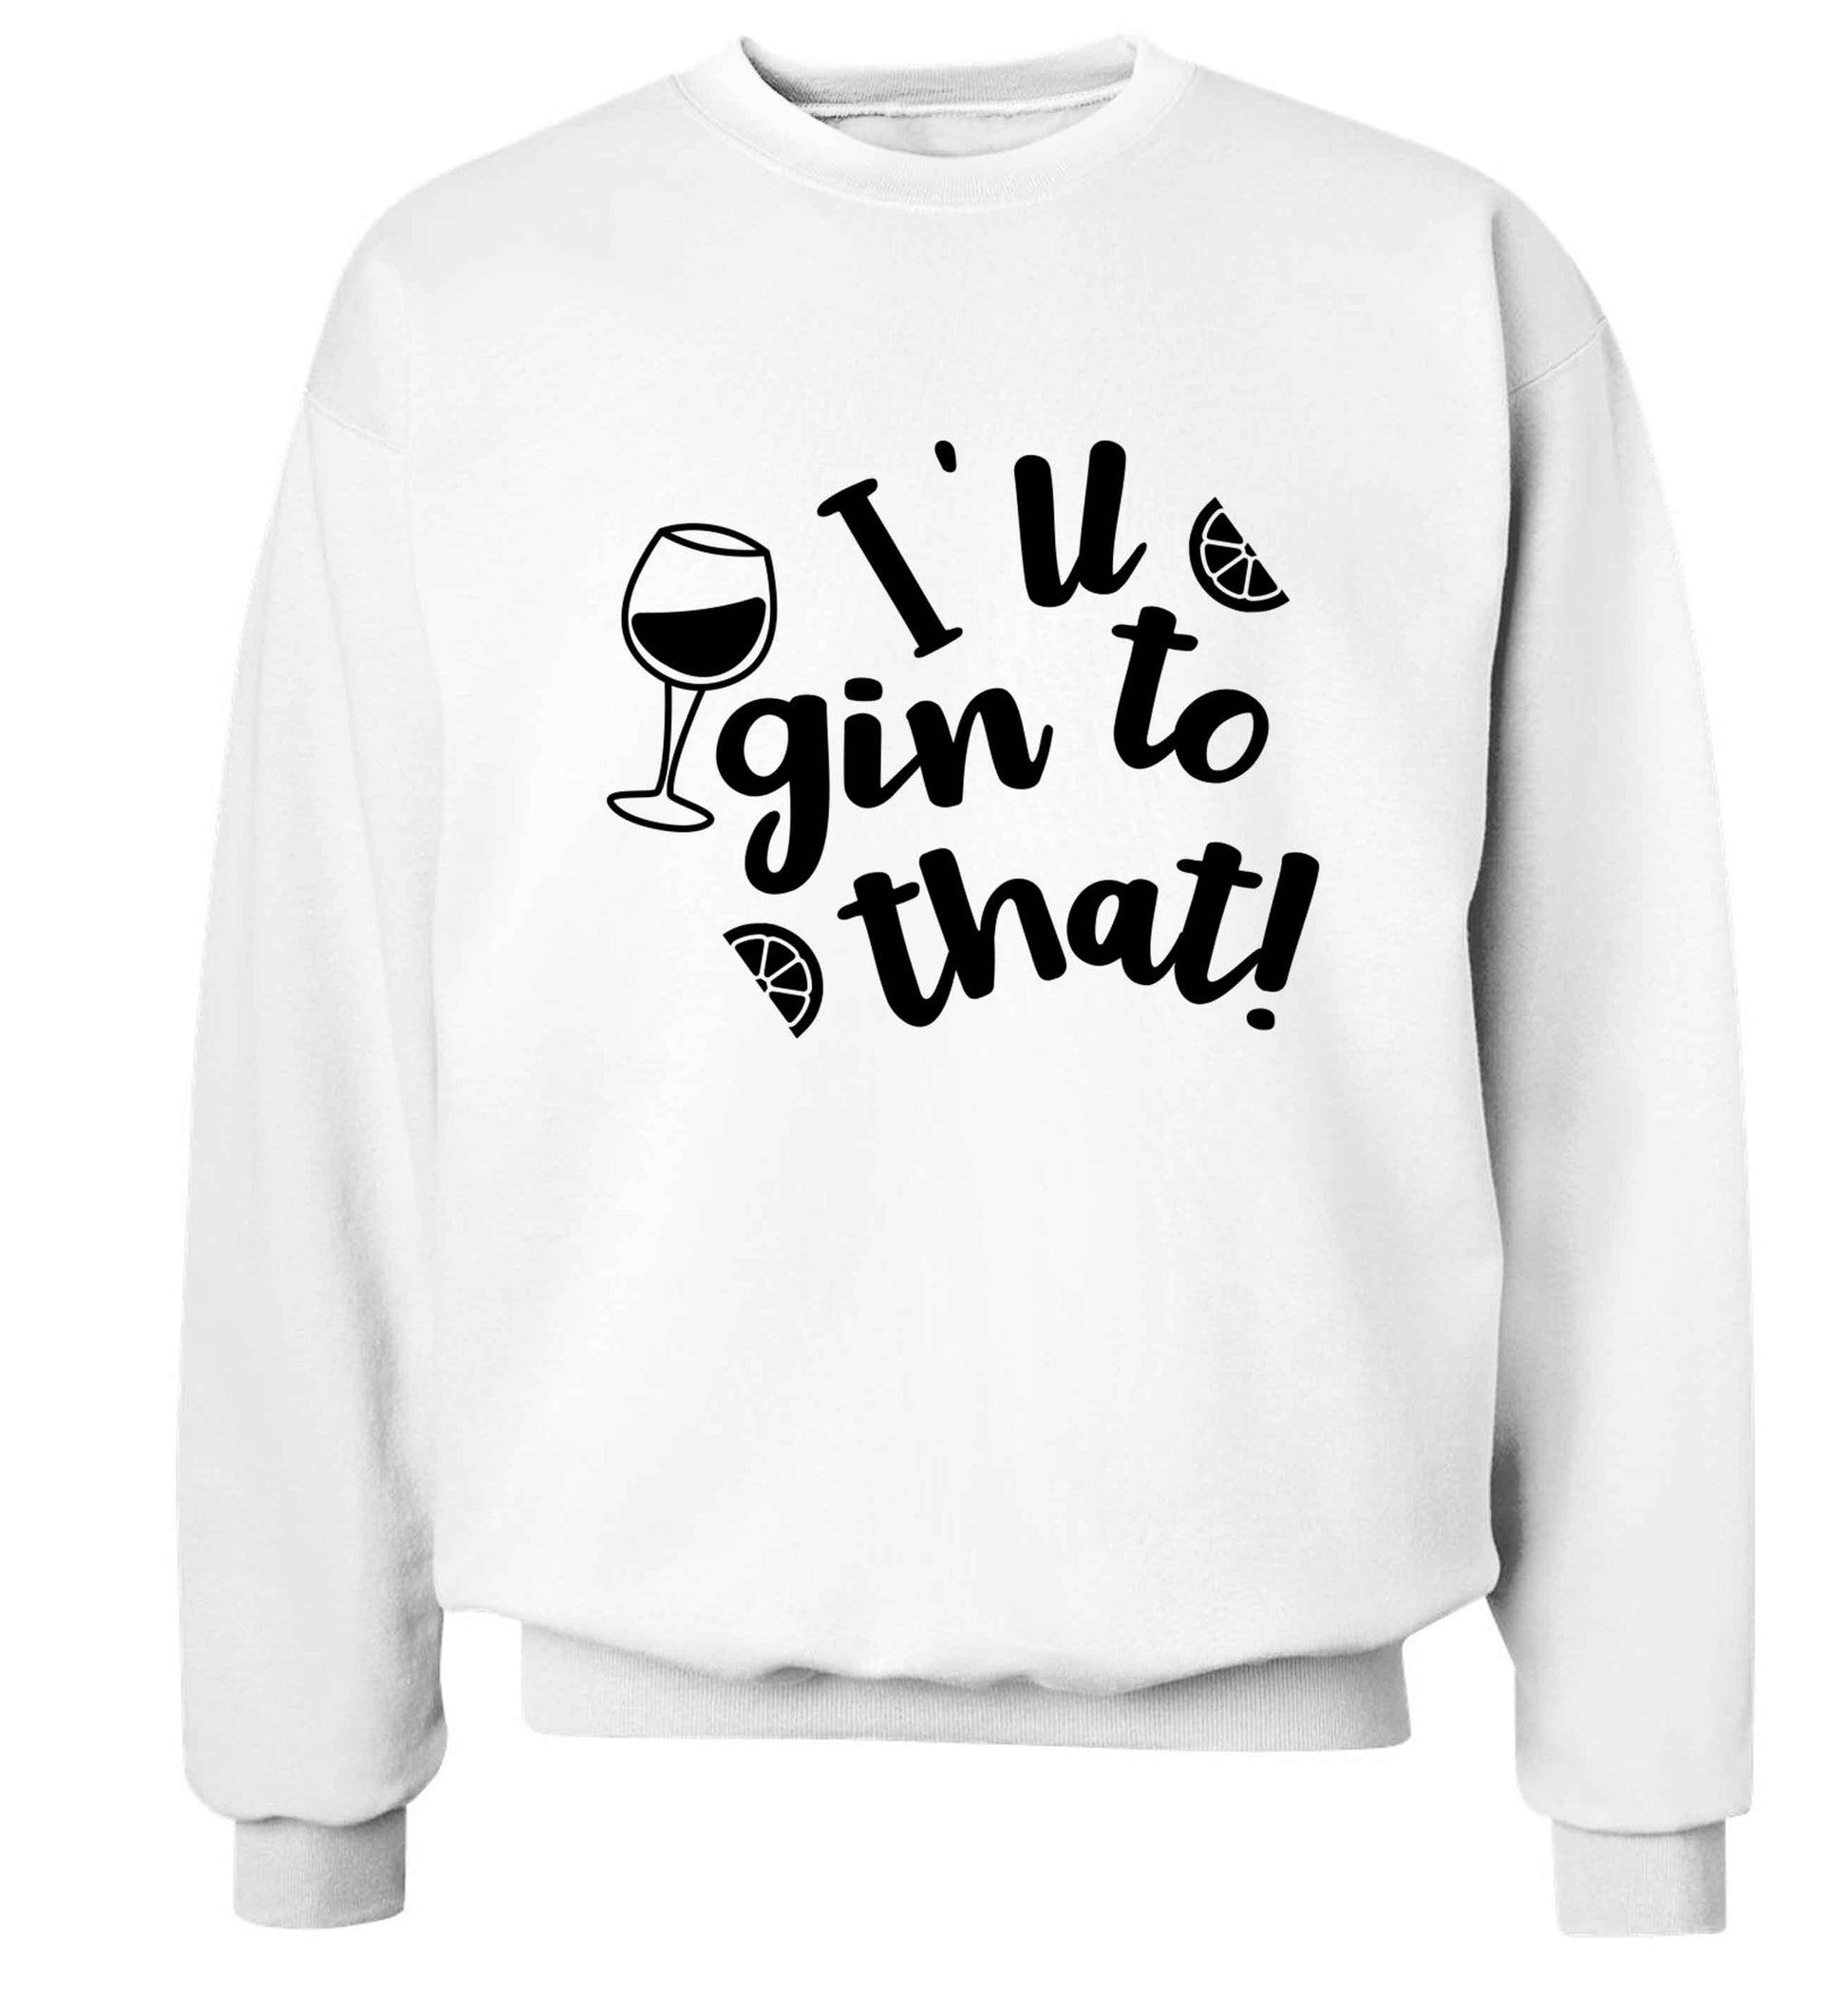 I'll gin to that! Adult's unisex white Sweater 2XL